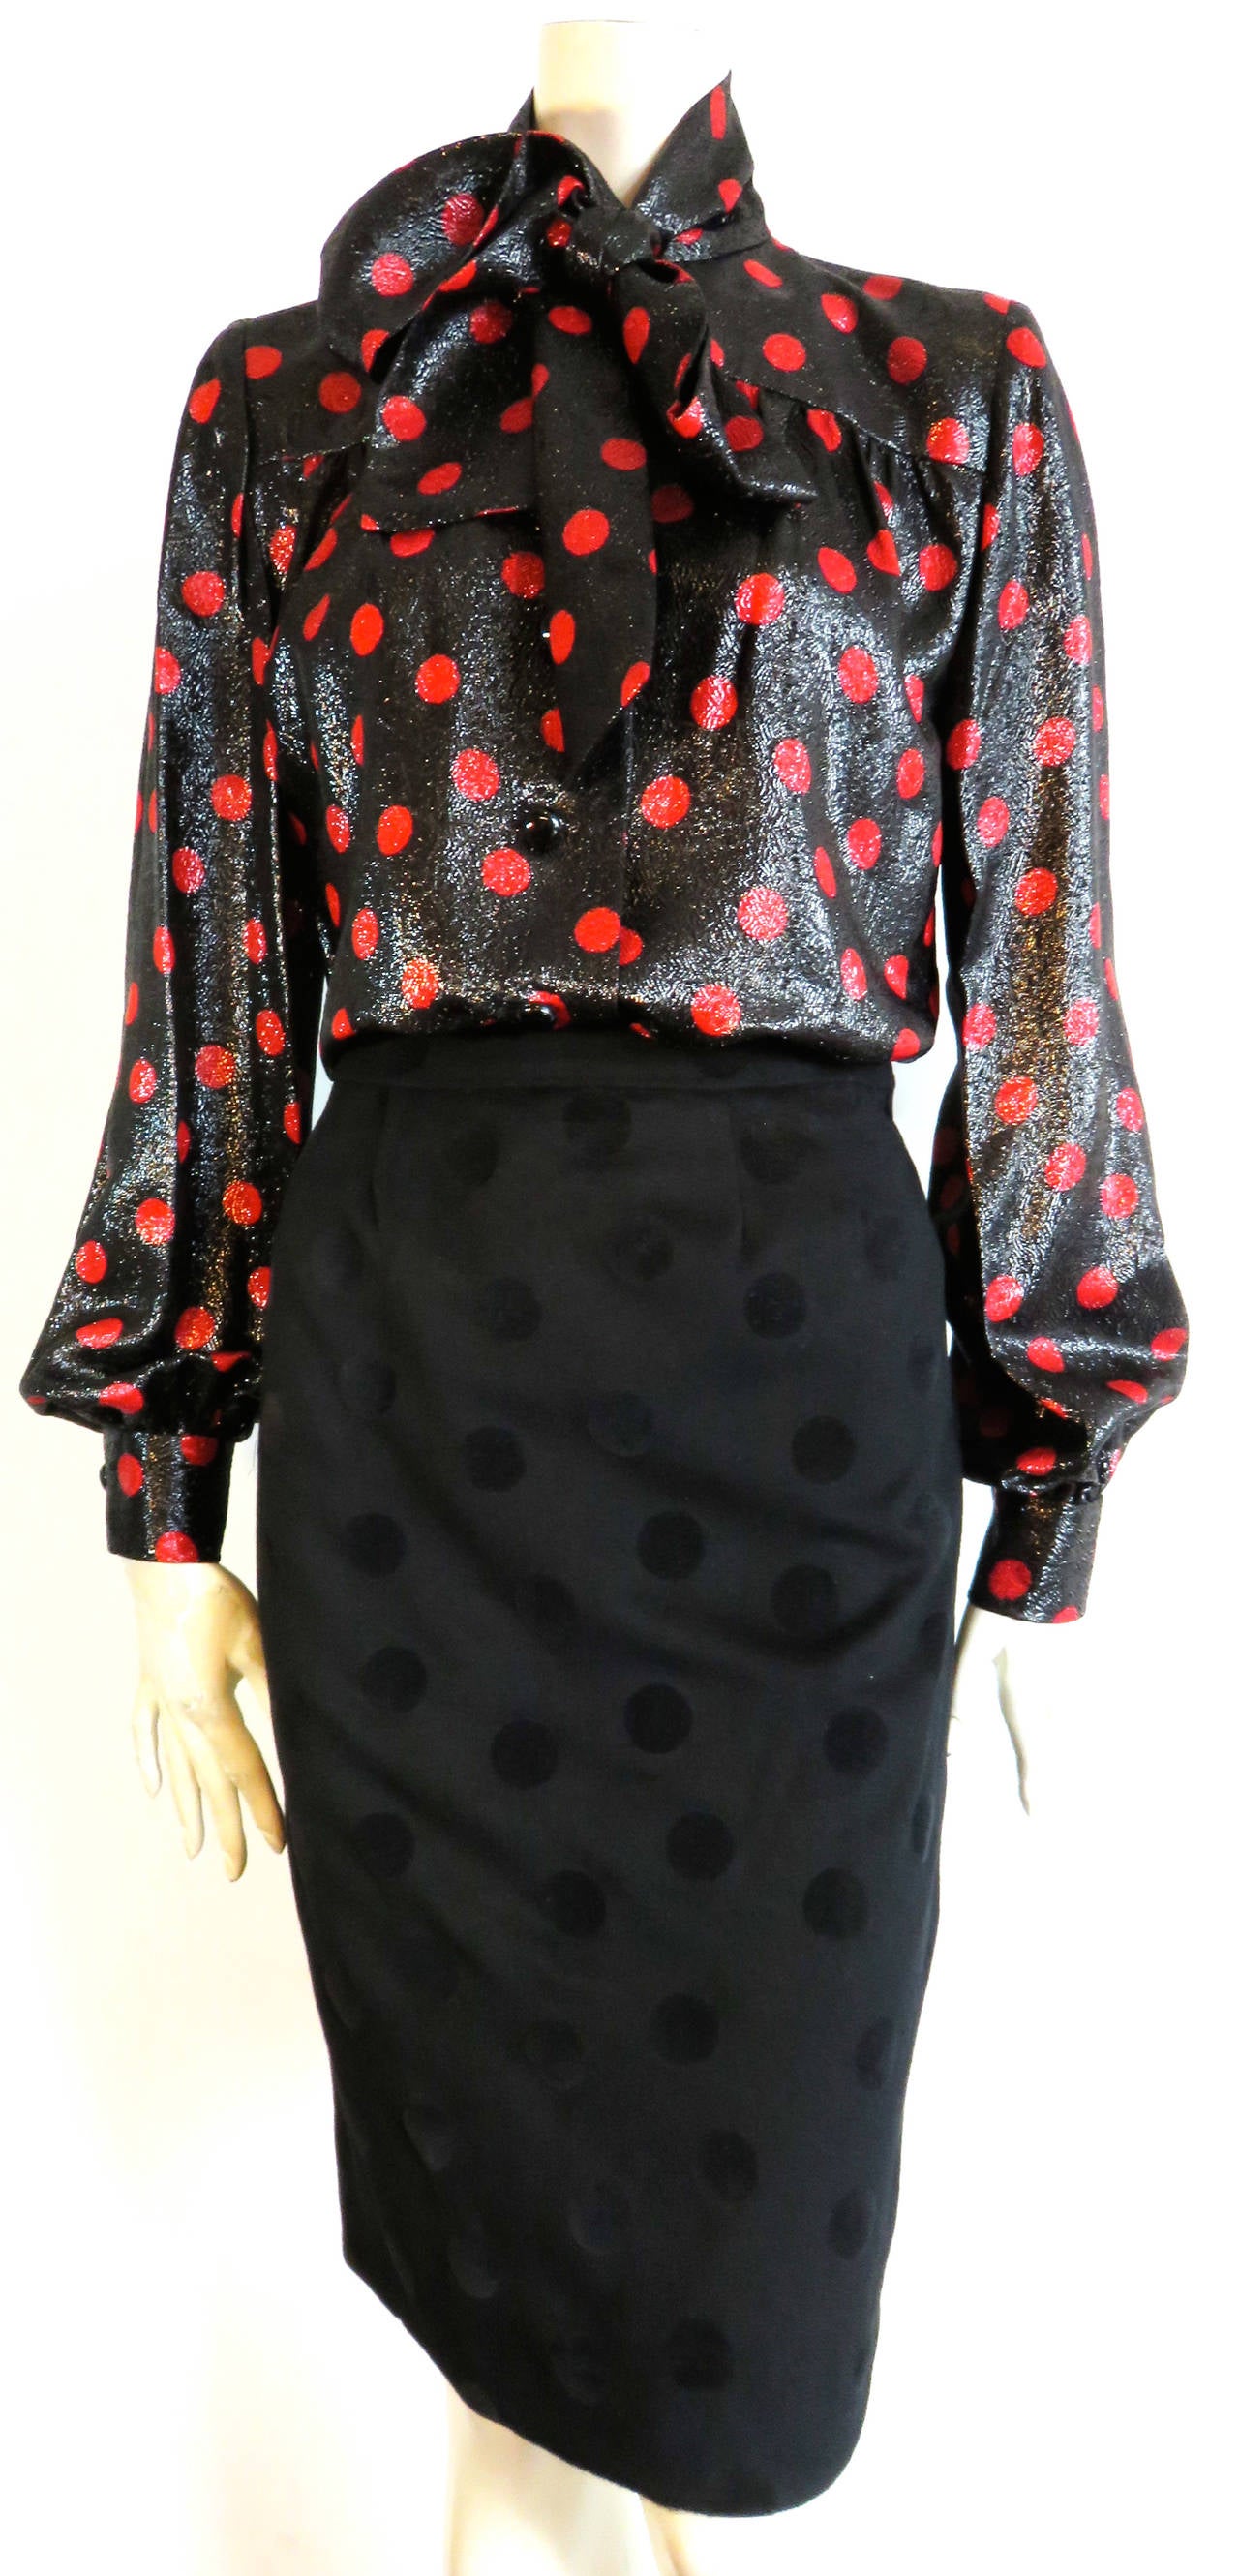 Excellent condition, 1970's GIVENCHY 3pc. Polka dot skirt suit & blouse set.

The black jacket and skirt are made of black wool with polka dotted, velvet flocking at the outer face of the fabric.  The jacket edges are bound in solid black velvet,